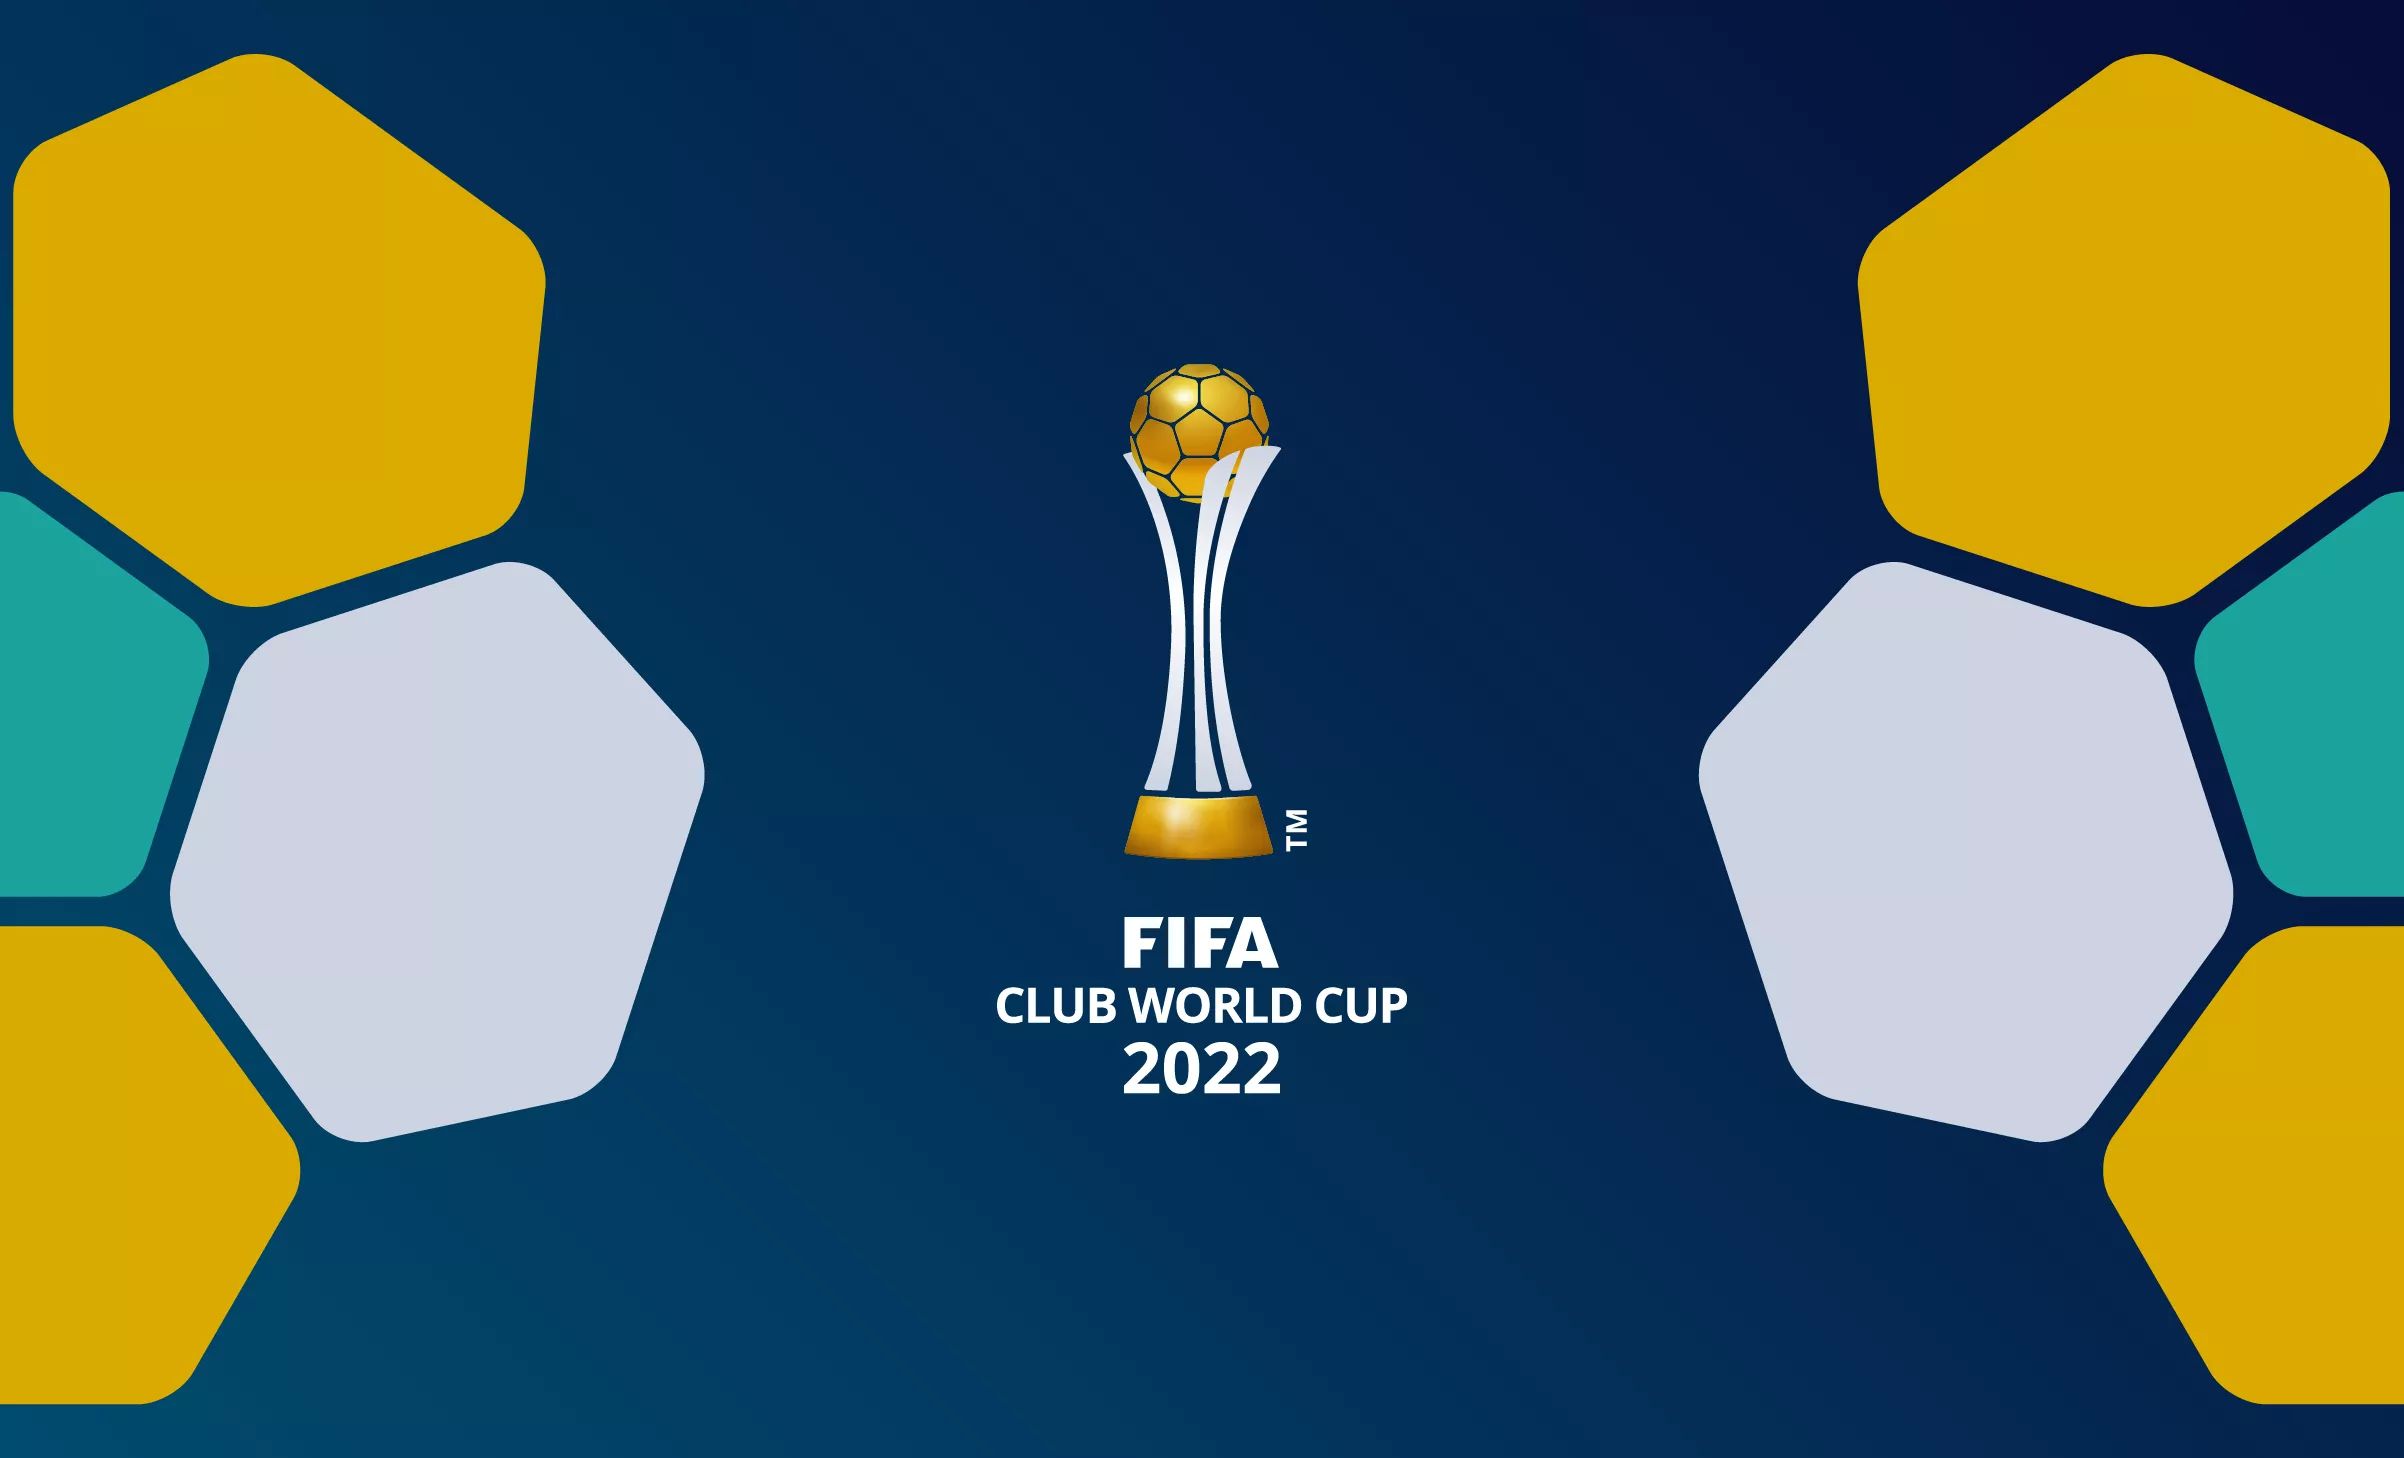 The 2022 FIFA Club World Cup